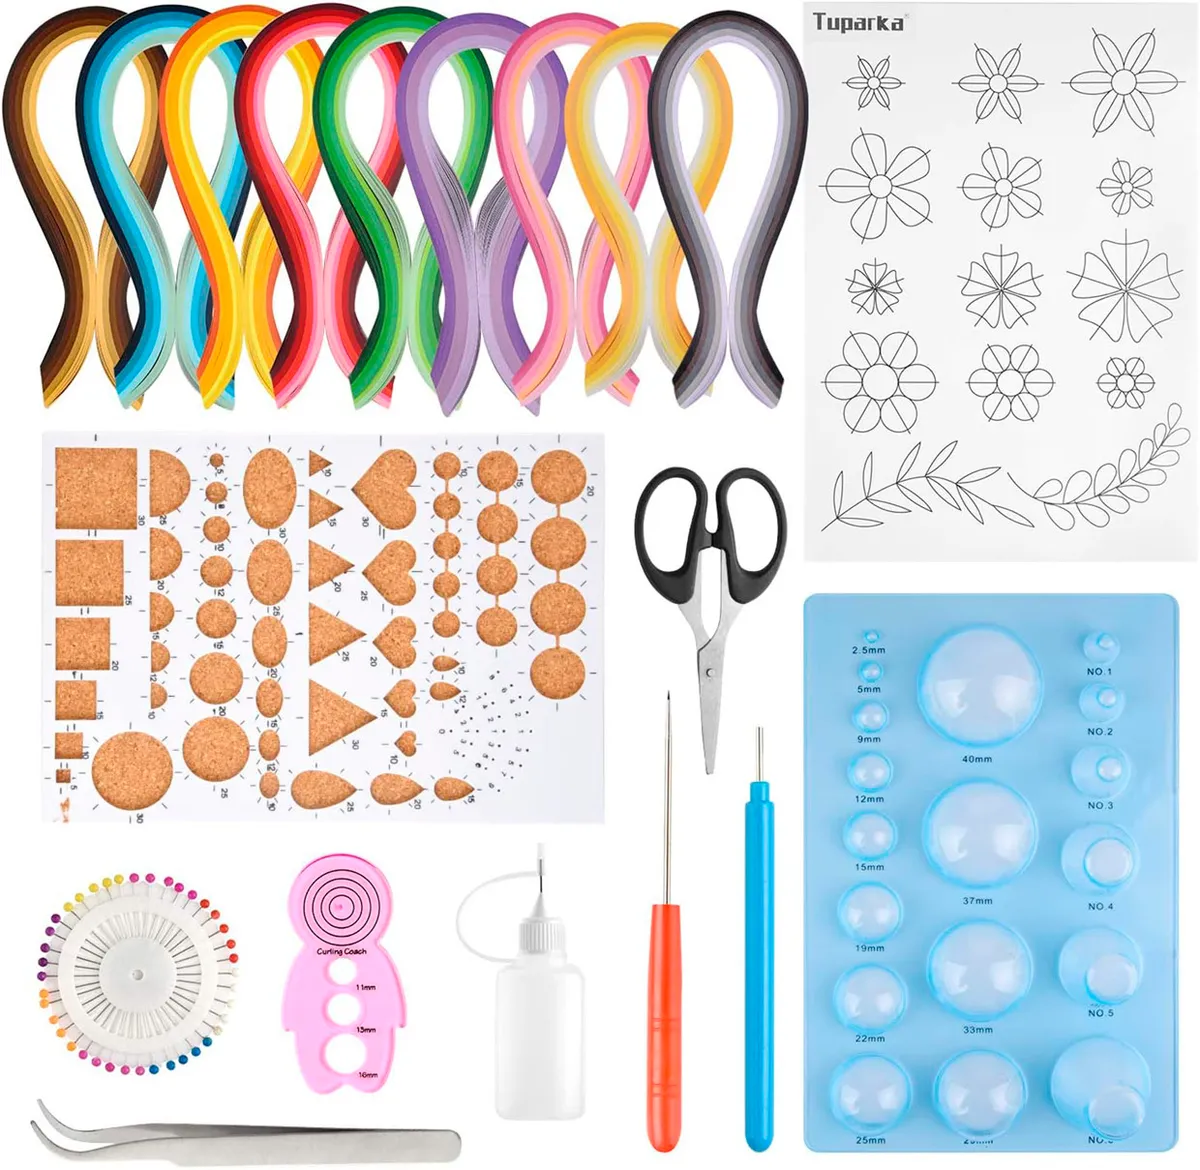 13 craft kits for adults looking to try something new in 2022